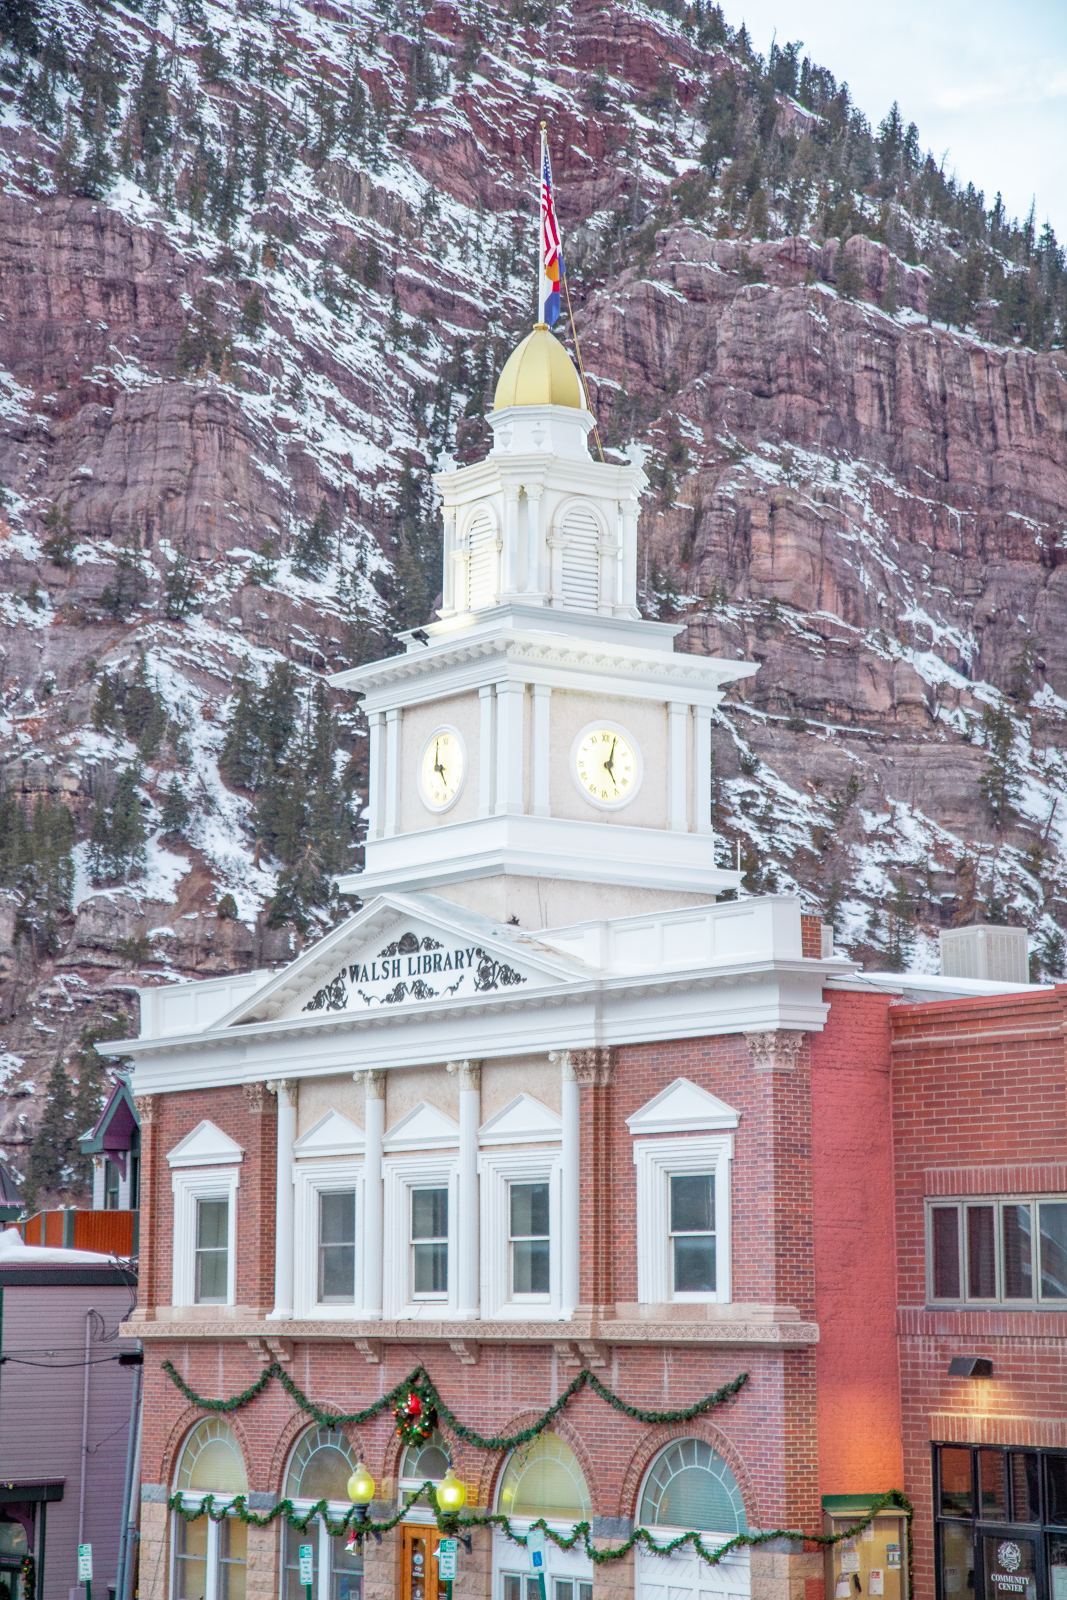 Visiting Ouray Colorado in the winter